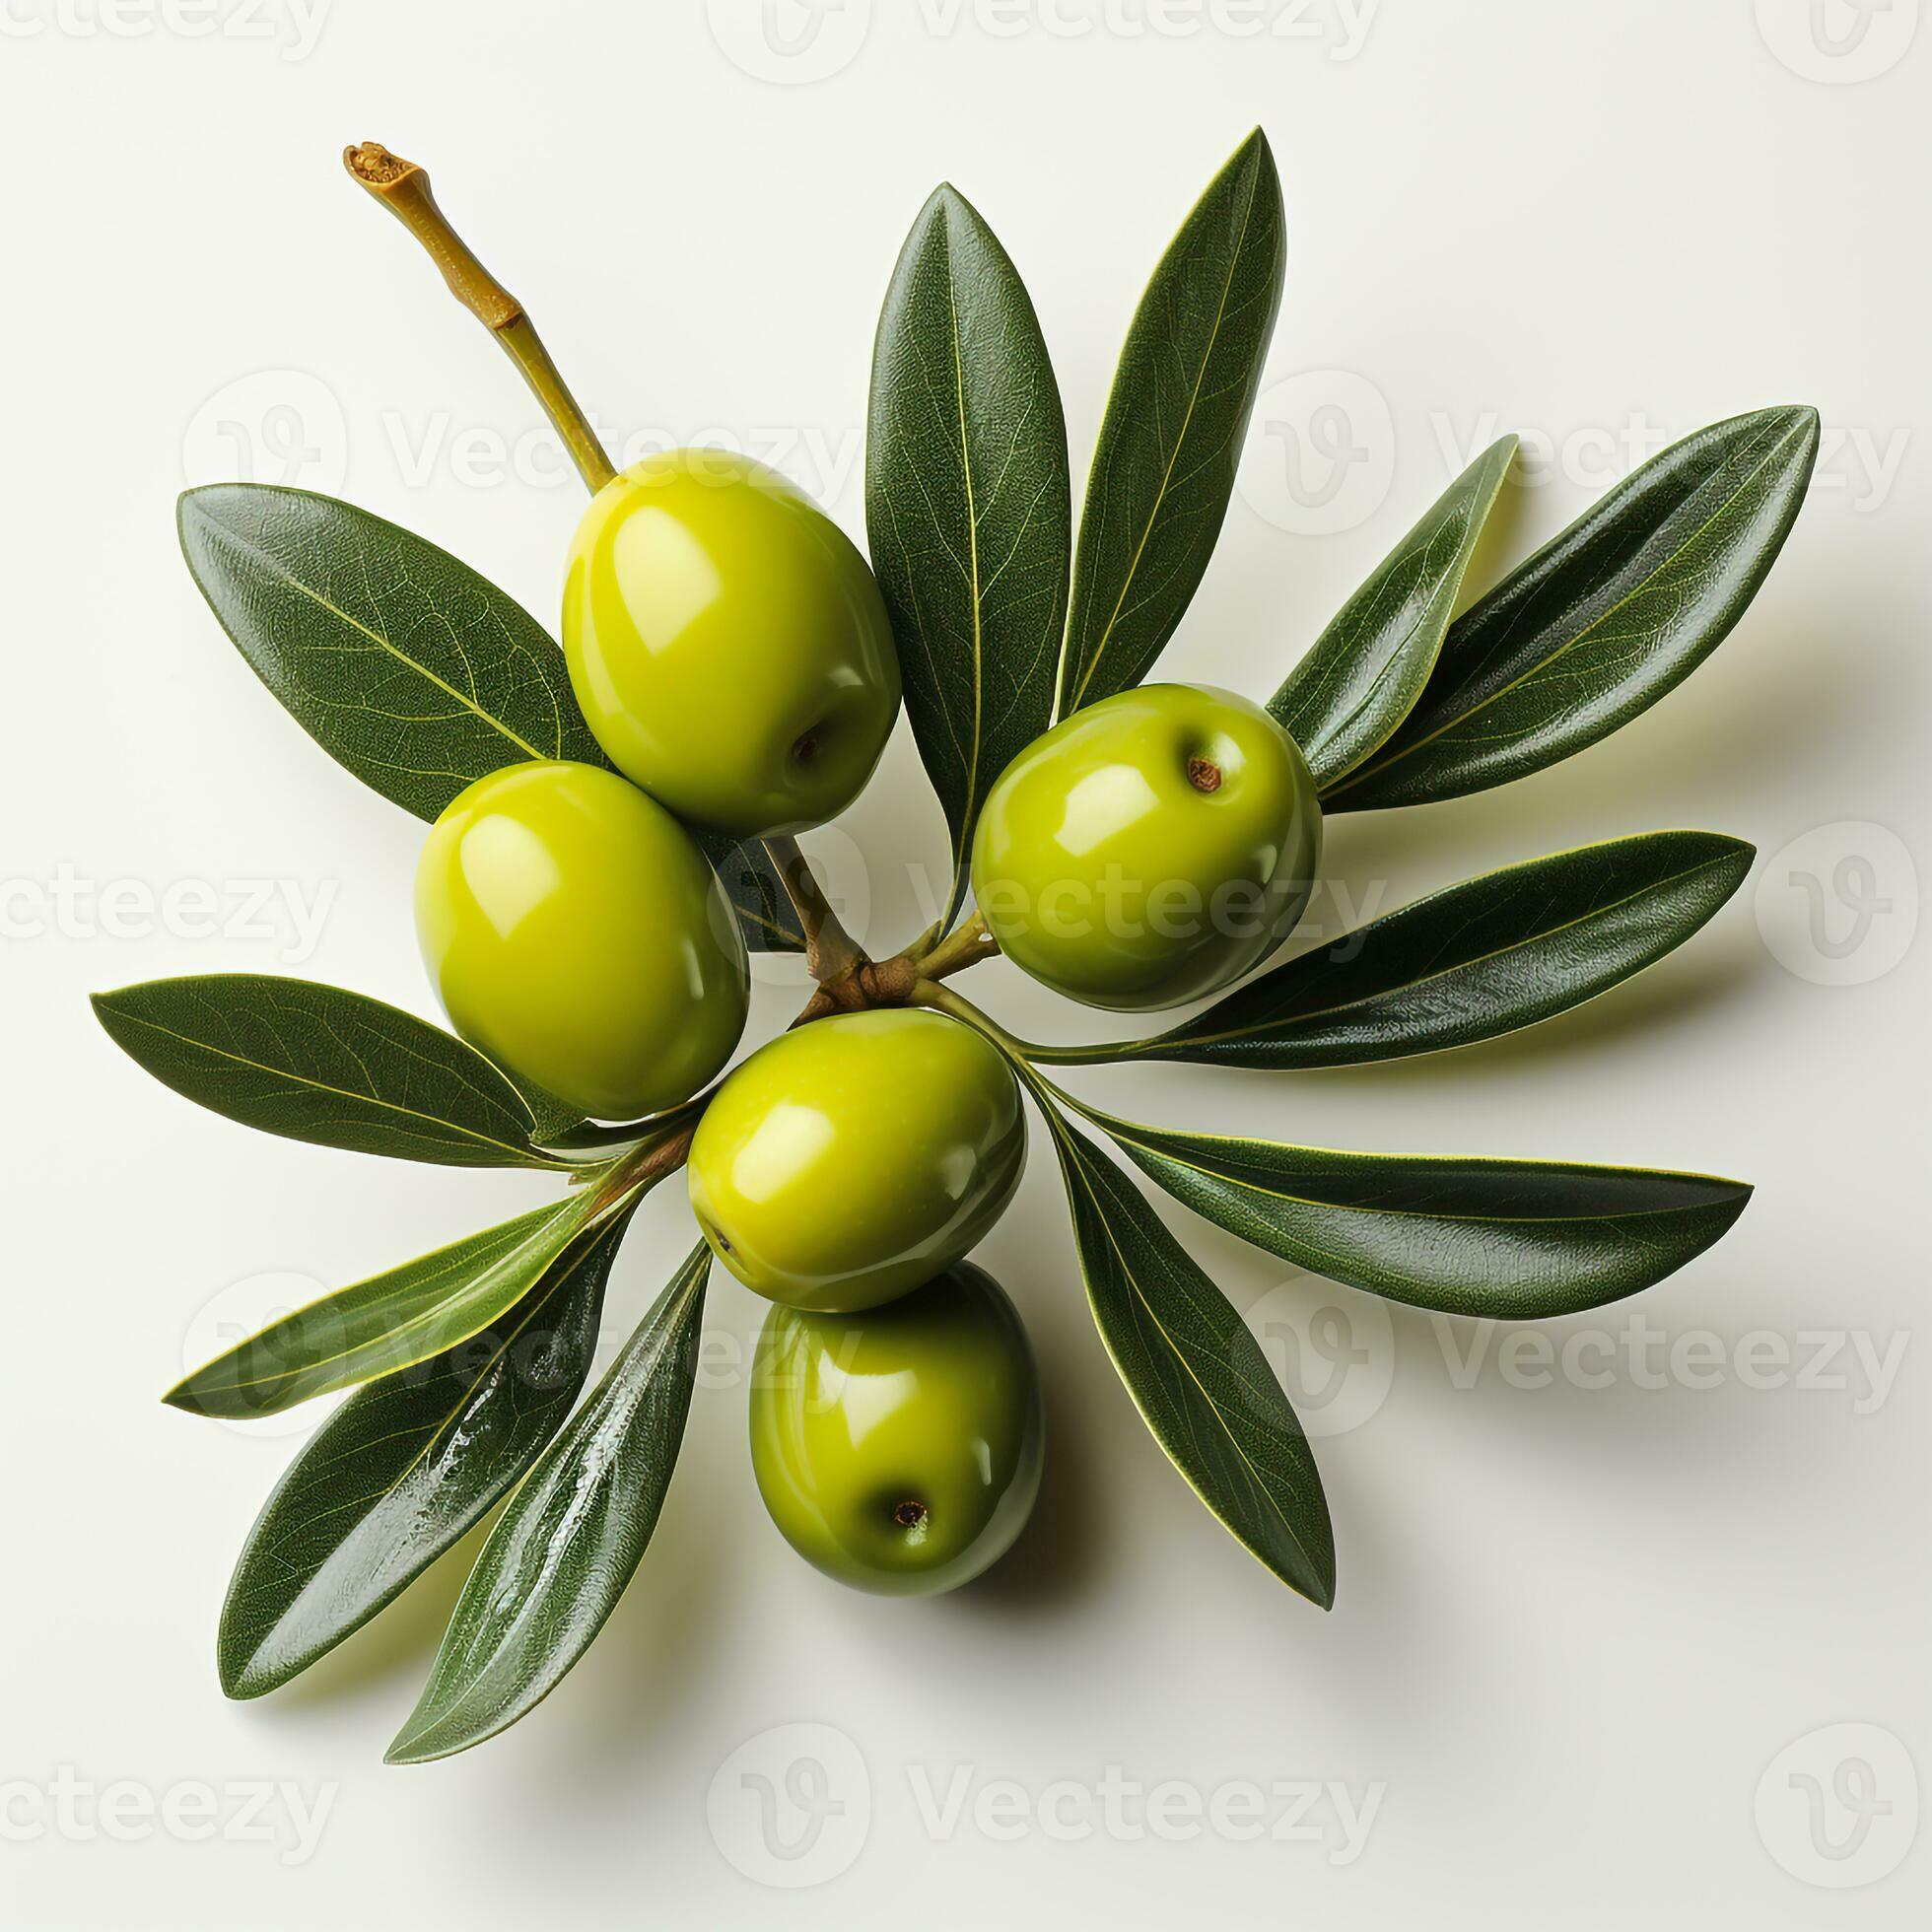 Fresh ripe olives are yellowish green in color 29287791 Stock